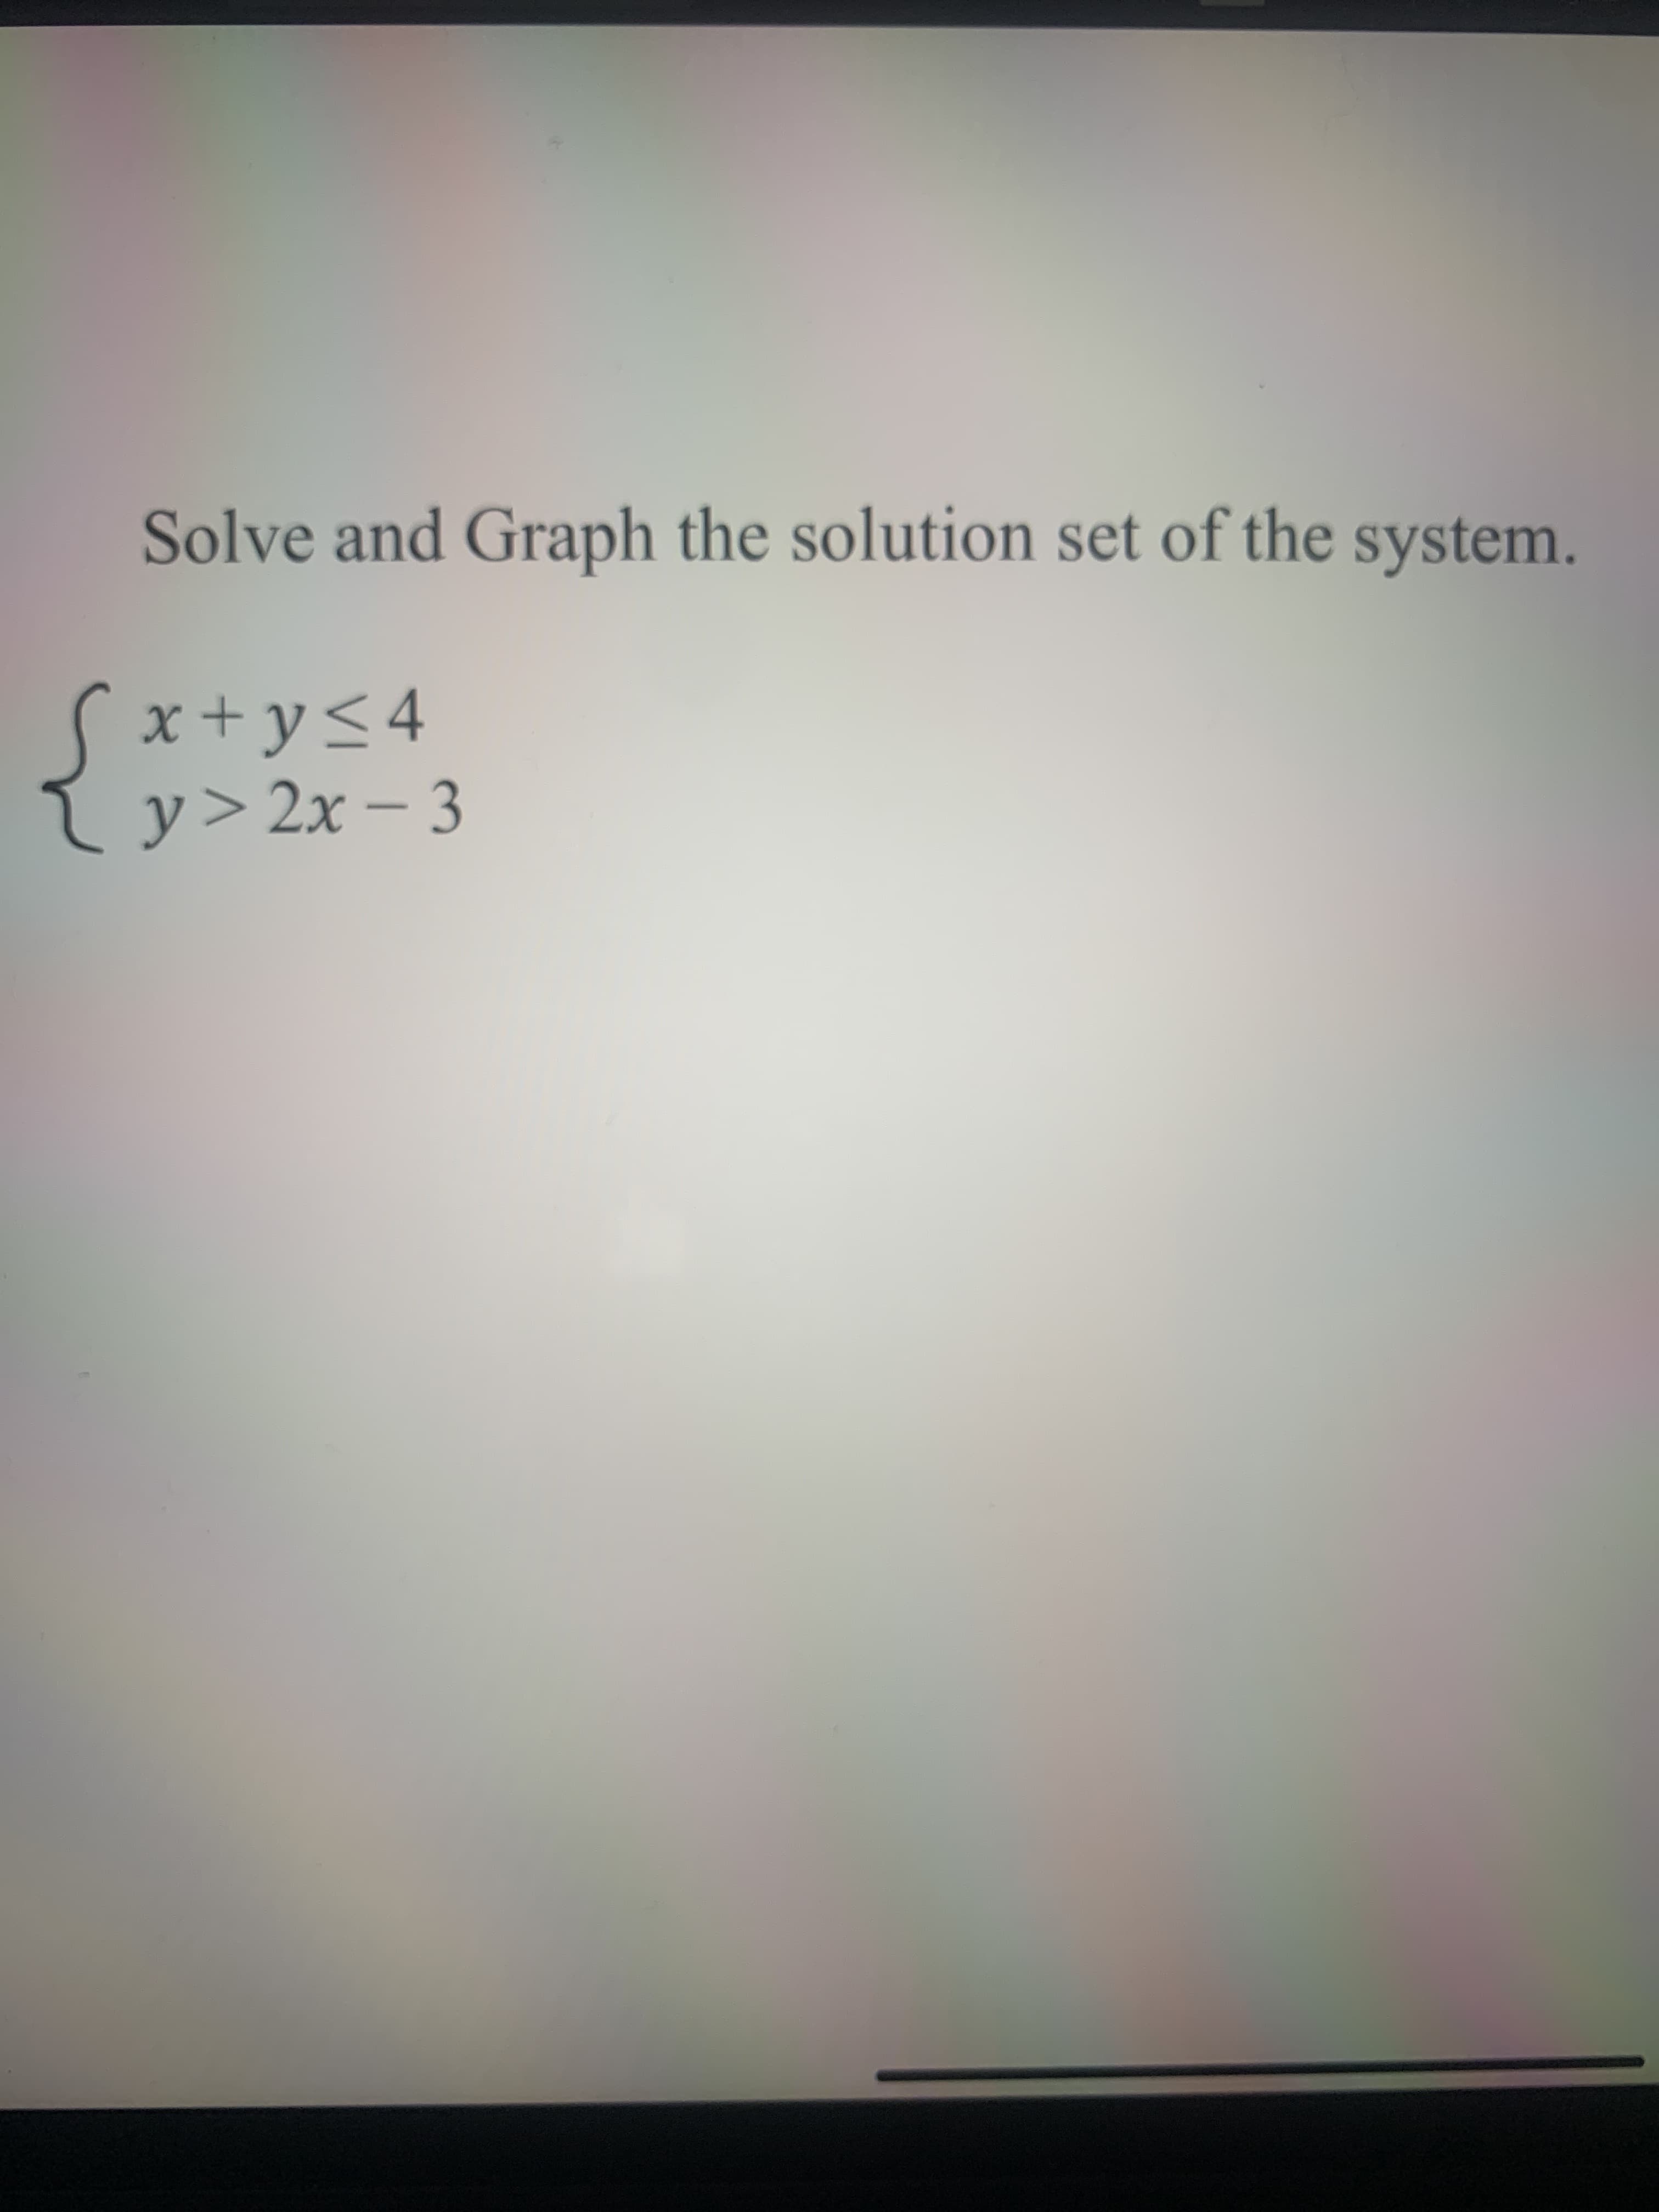 Solve and Graph the solution set of the system.
